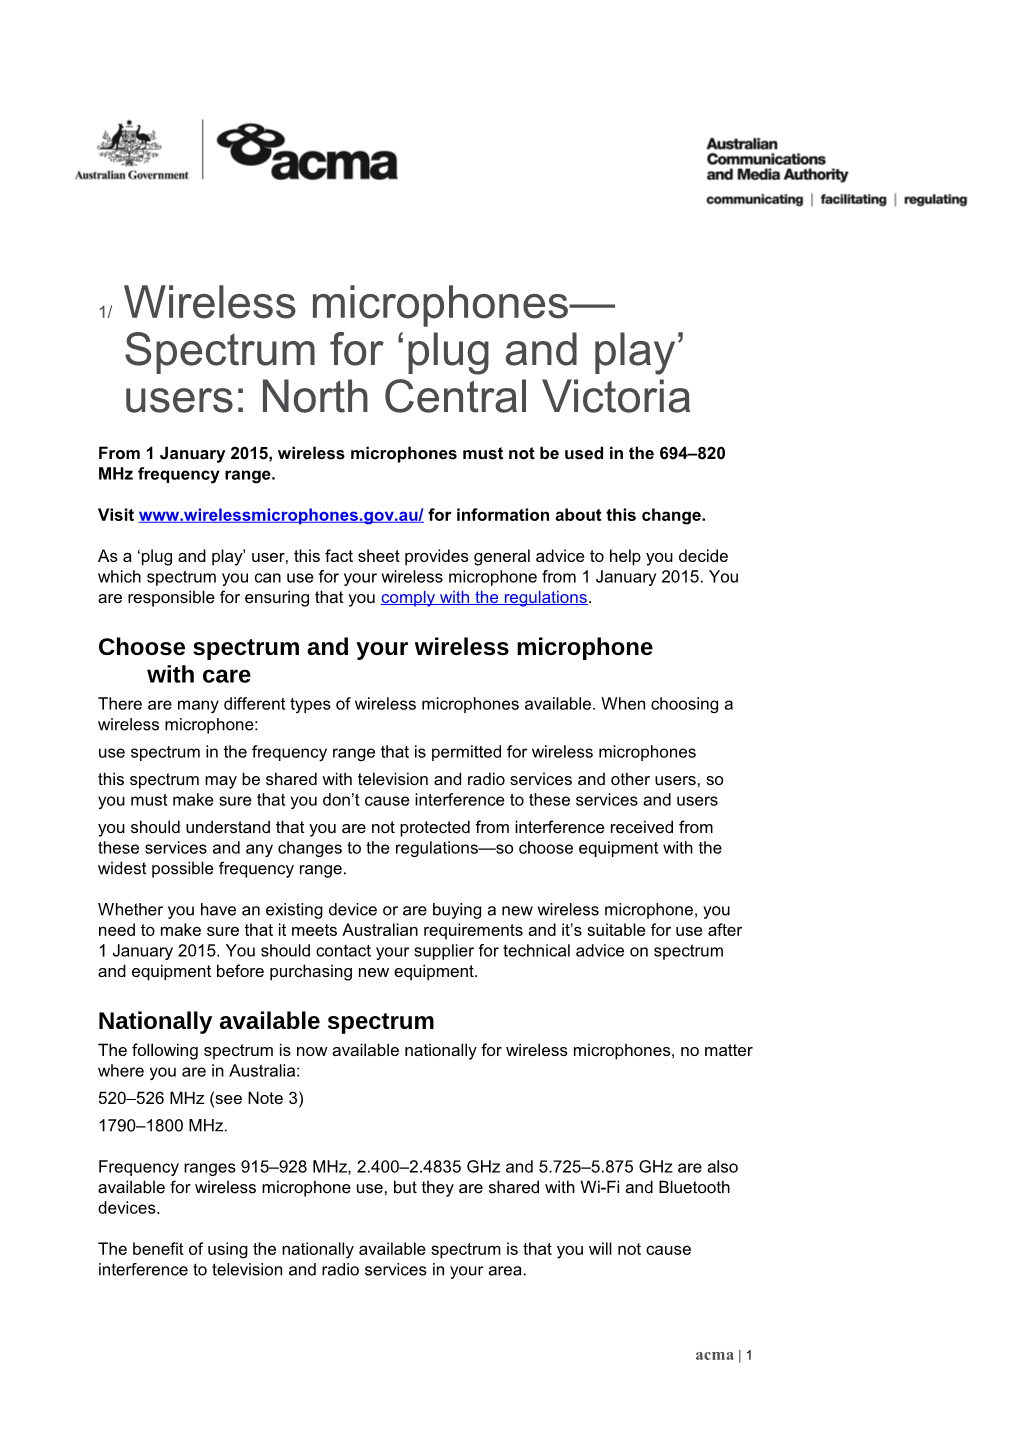 Wireless Microphones Spectrum for Plug and Play Users: North Central Victoria